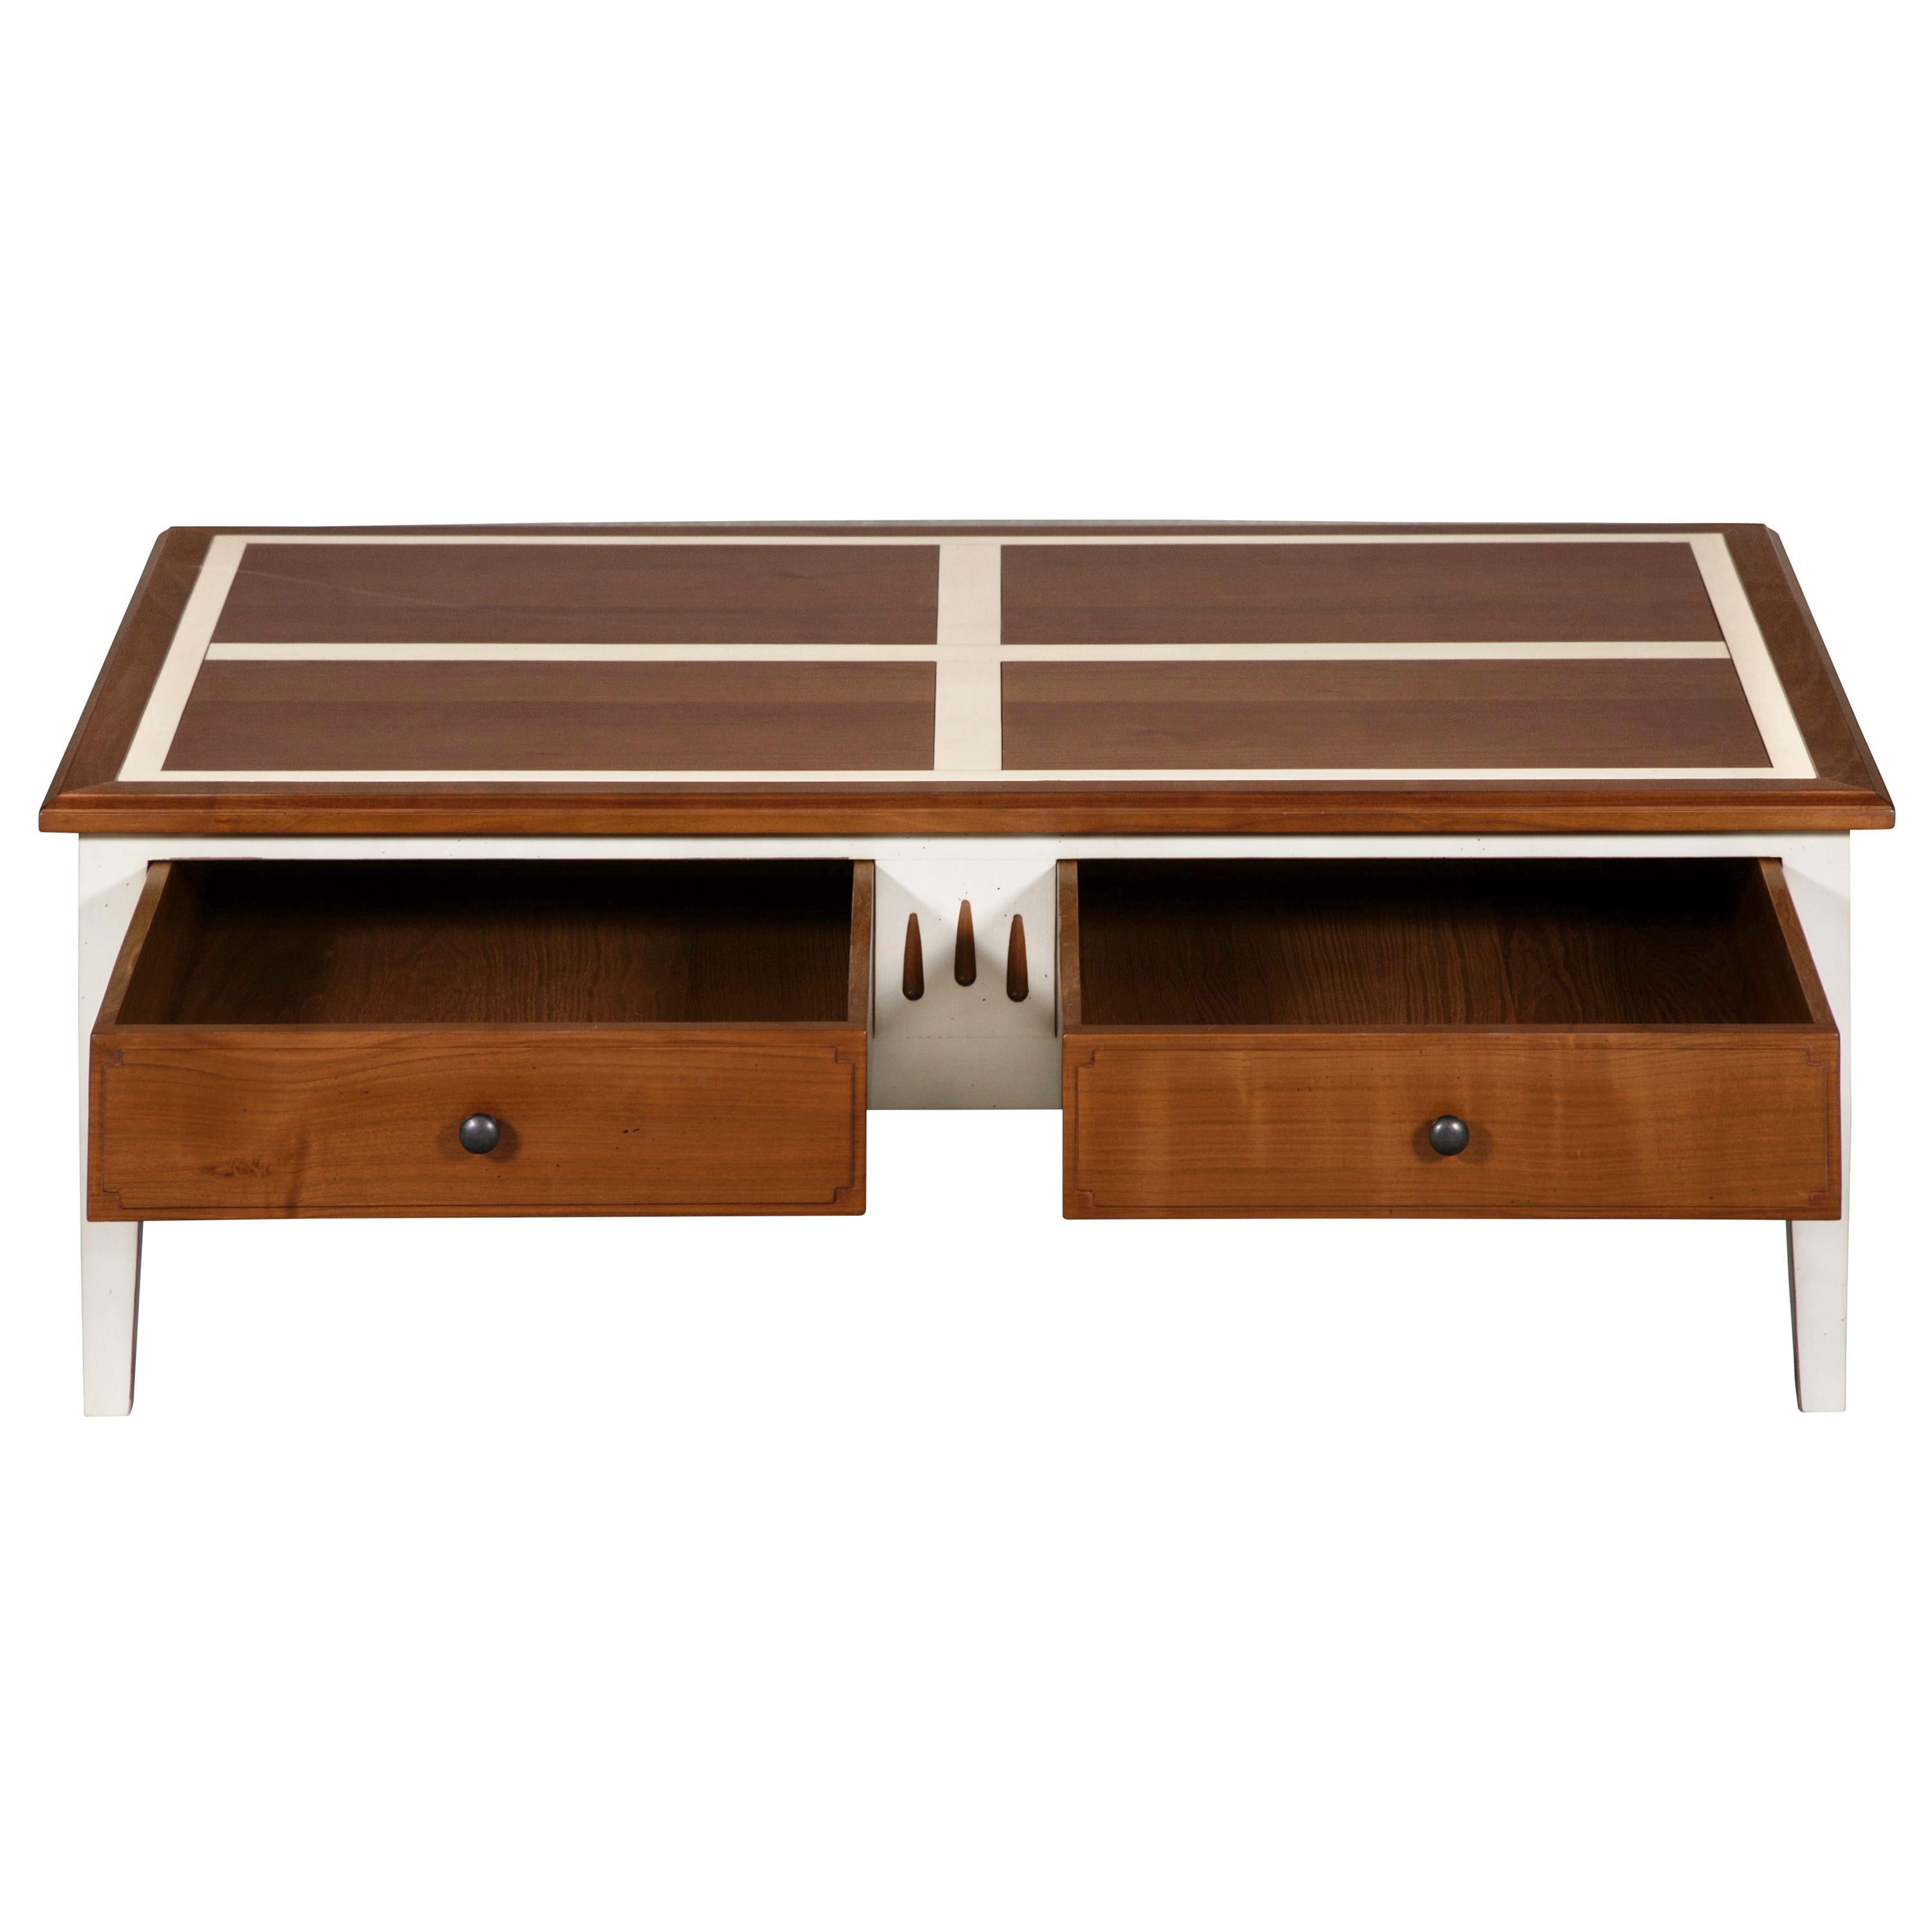 Neoclassical 2-Drawer Coffee Table in Cherry, a French Directoire Style Re-Interpretation  For Sale